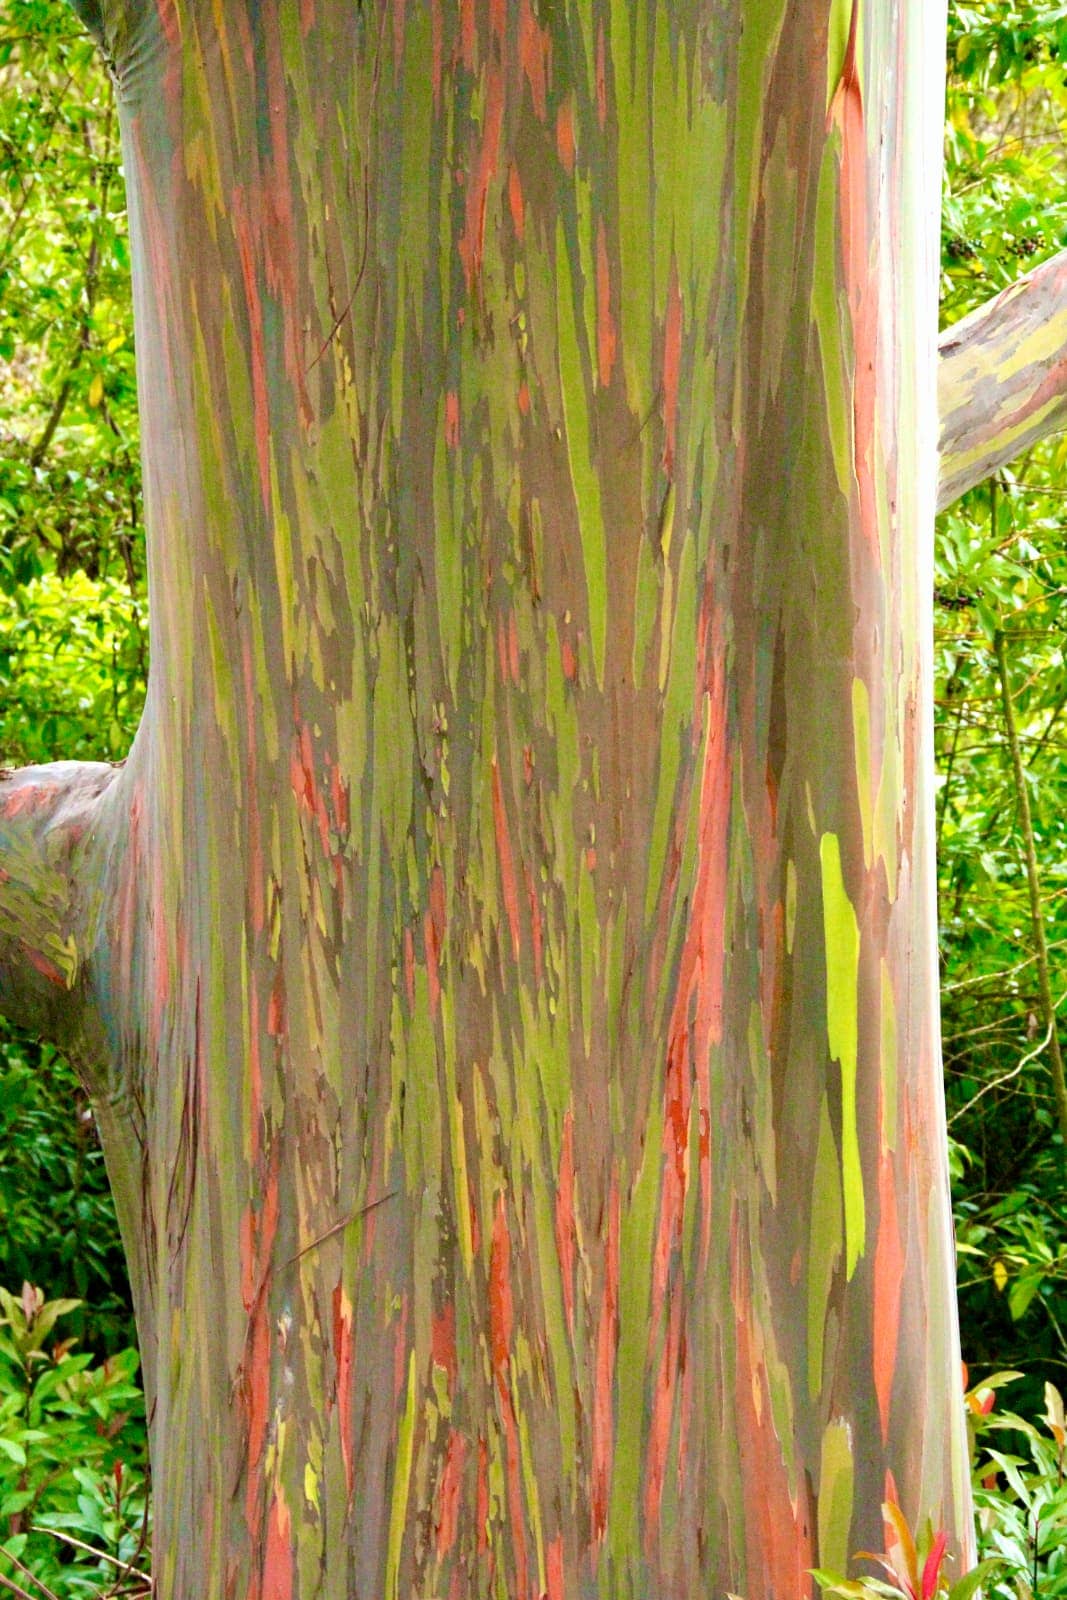 Tree with red and green naturally painted bark